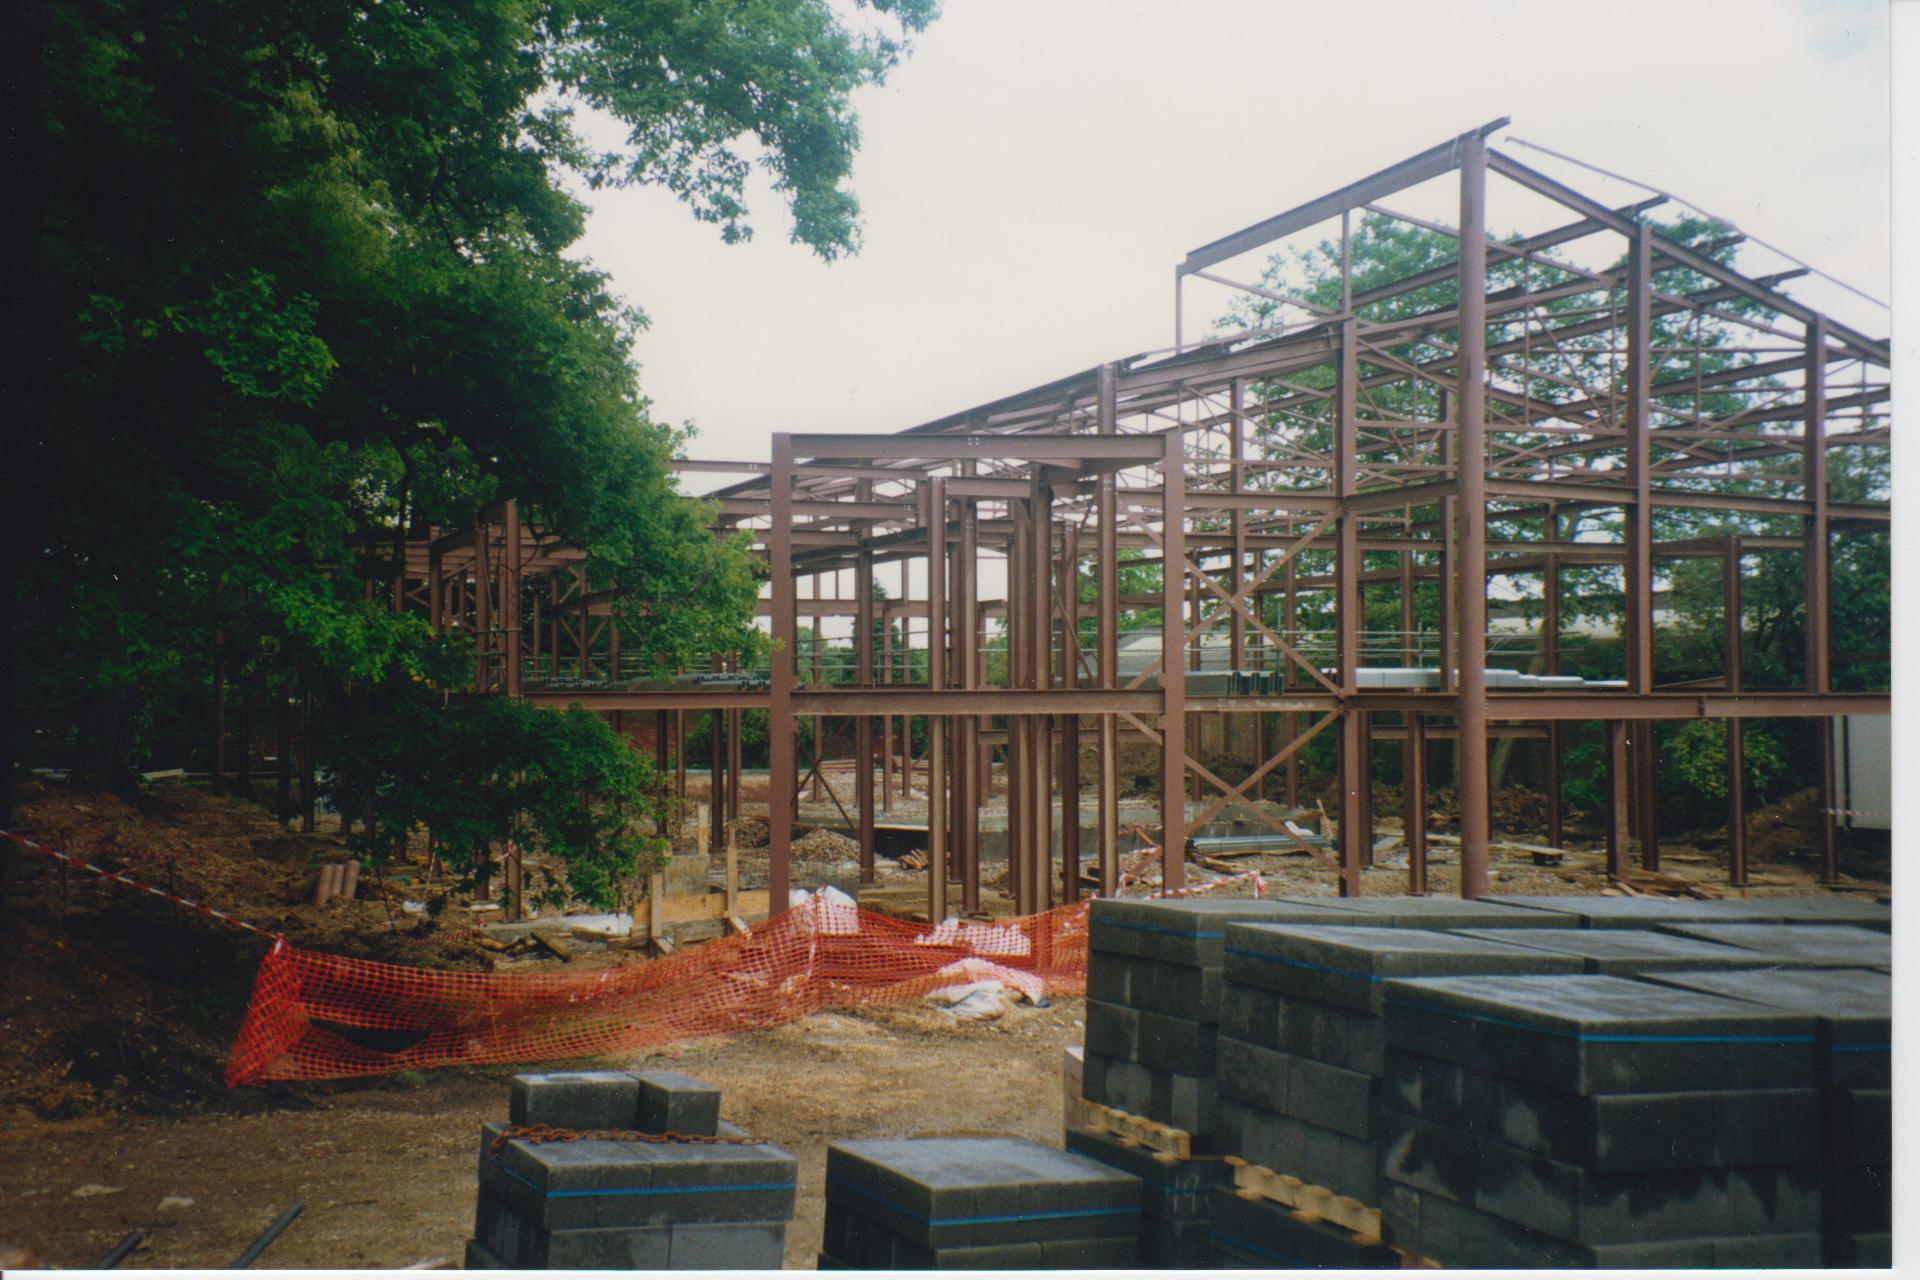 1993/4: The Rayne theatre in its infancy